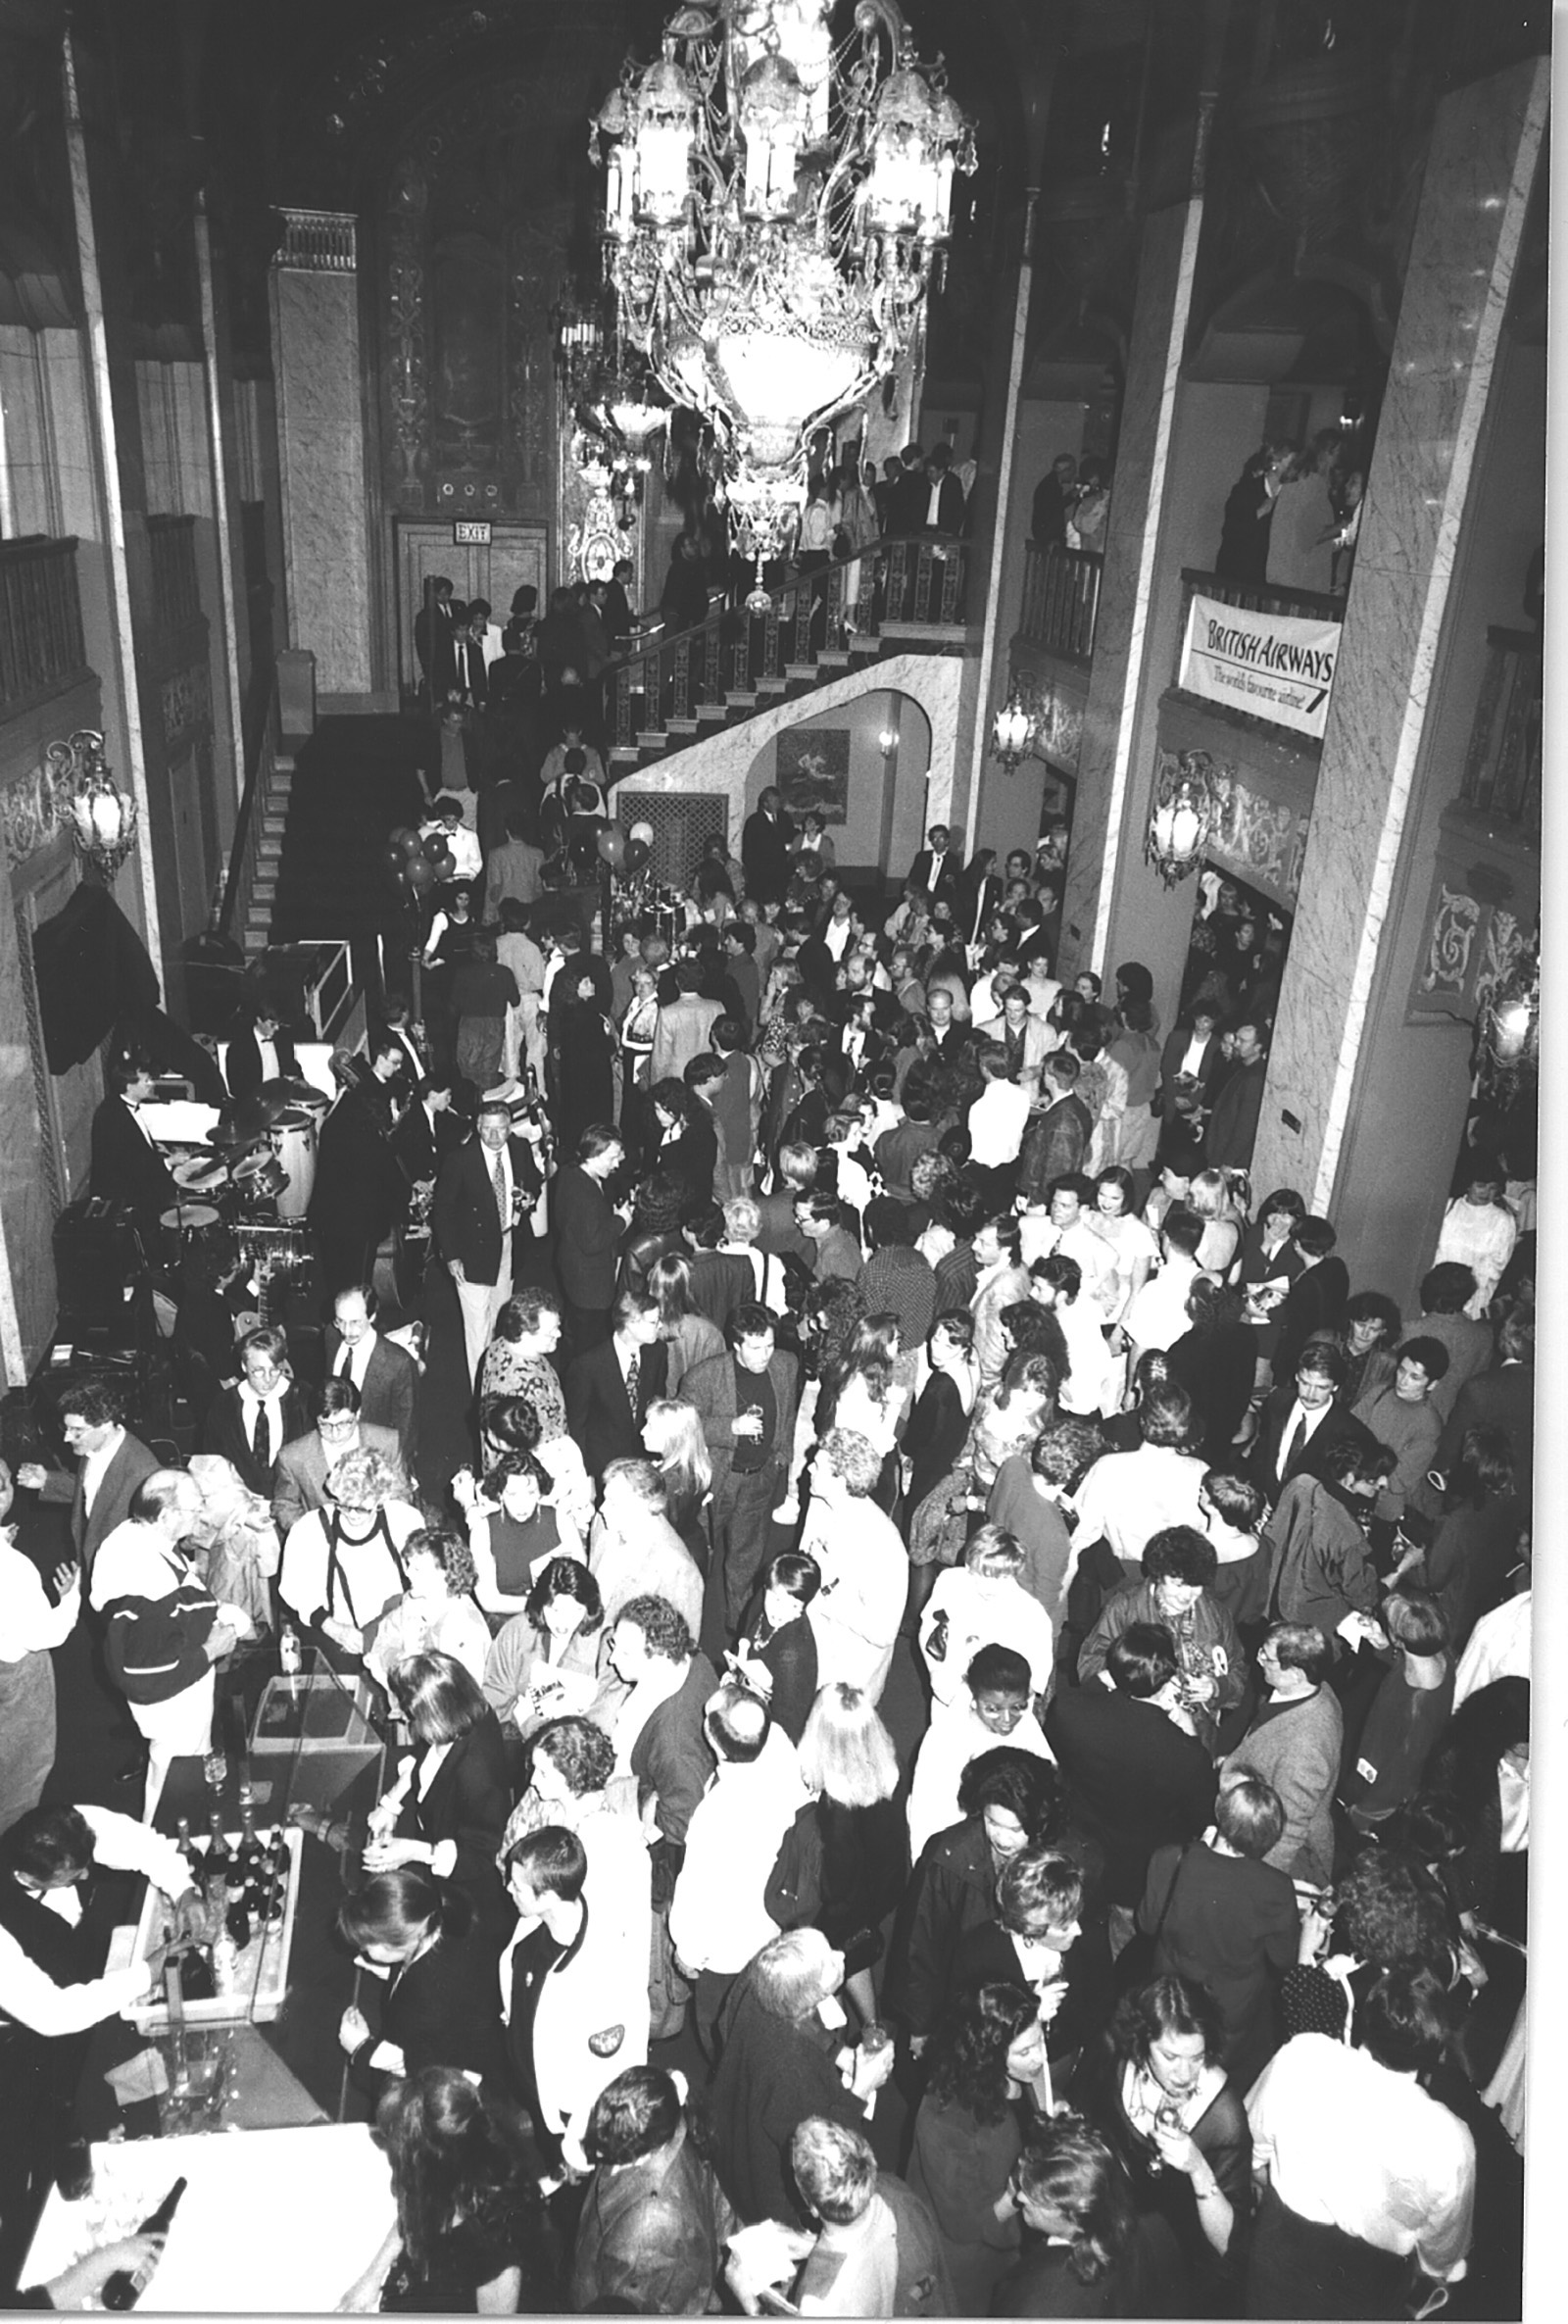 A very full lobby of guests at the Paramount Theatre await the Opening Night film, The Miracle